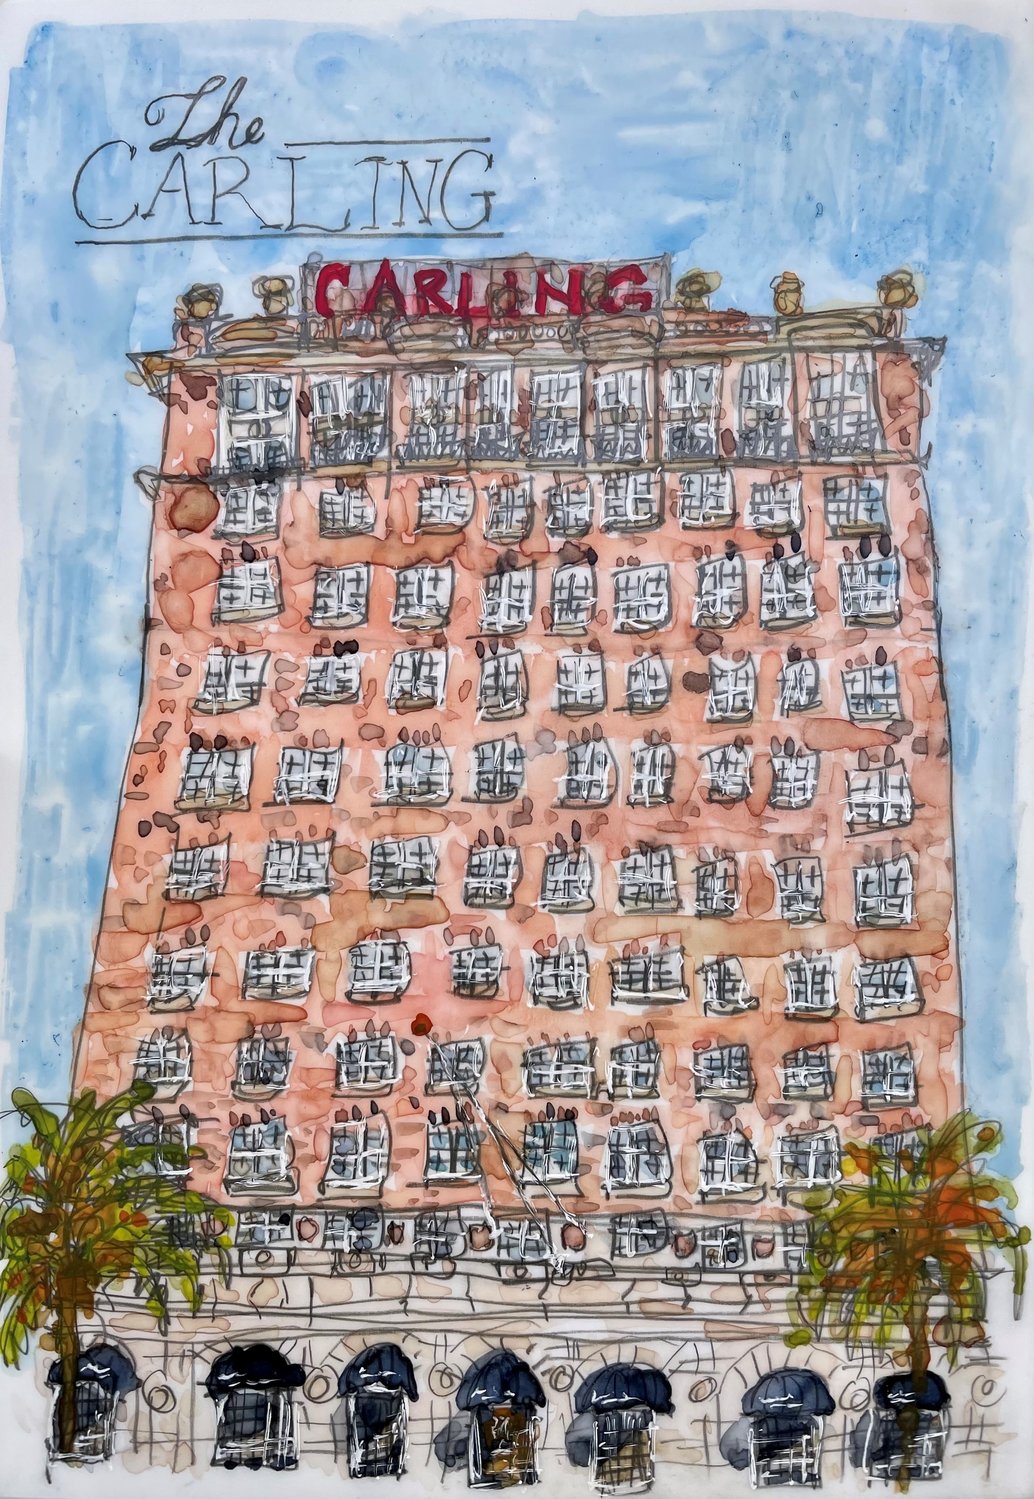 “The Carling,” 5-by-7 inches, watercolor and pencil on YUPO paper, 2022 by Teresa Cook